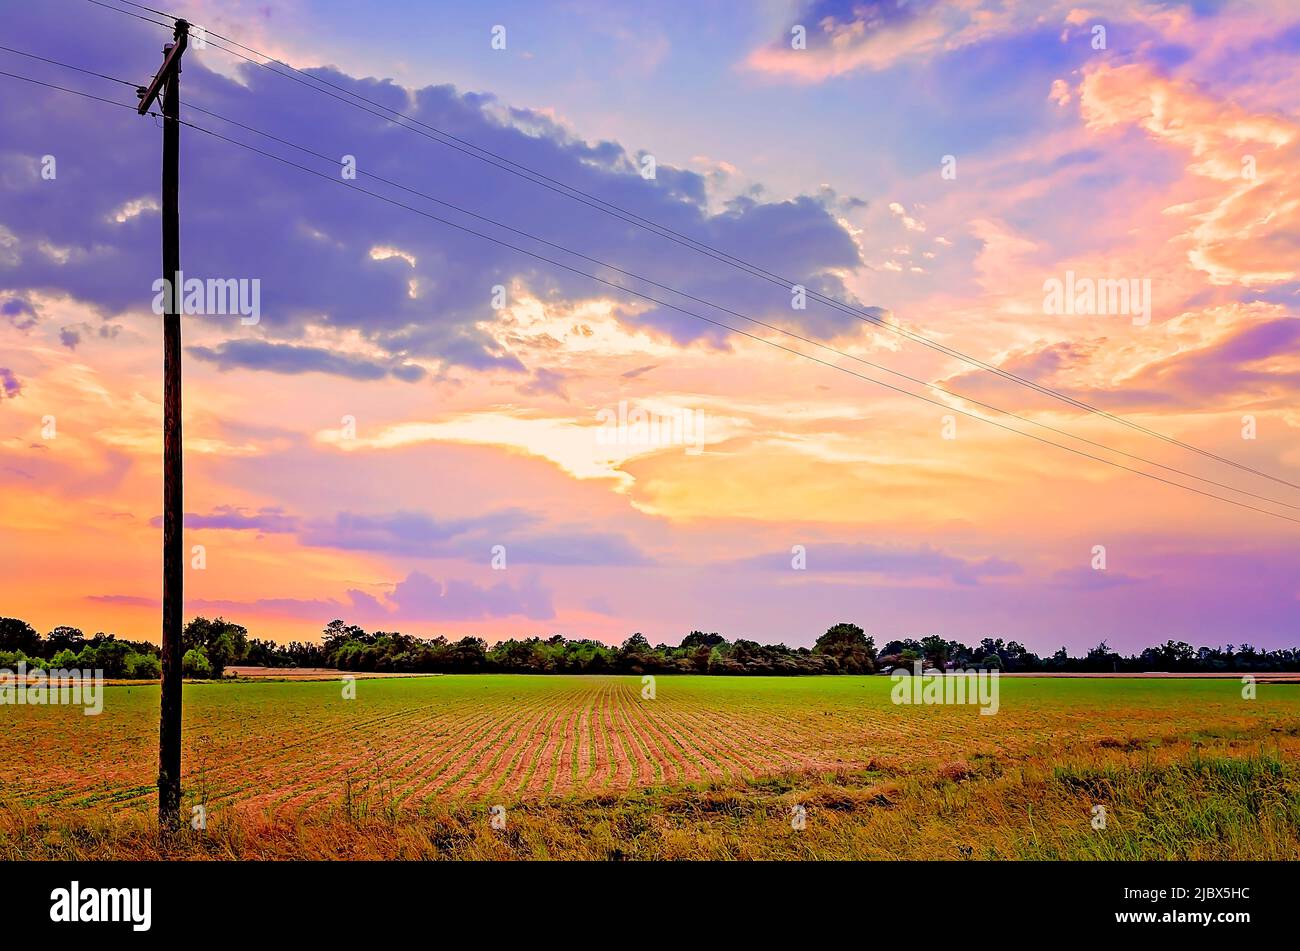 Wooden power poles carry electricity to rural electric customers, May 17, 2012, in Columbus, Mississippi. Stock Photo